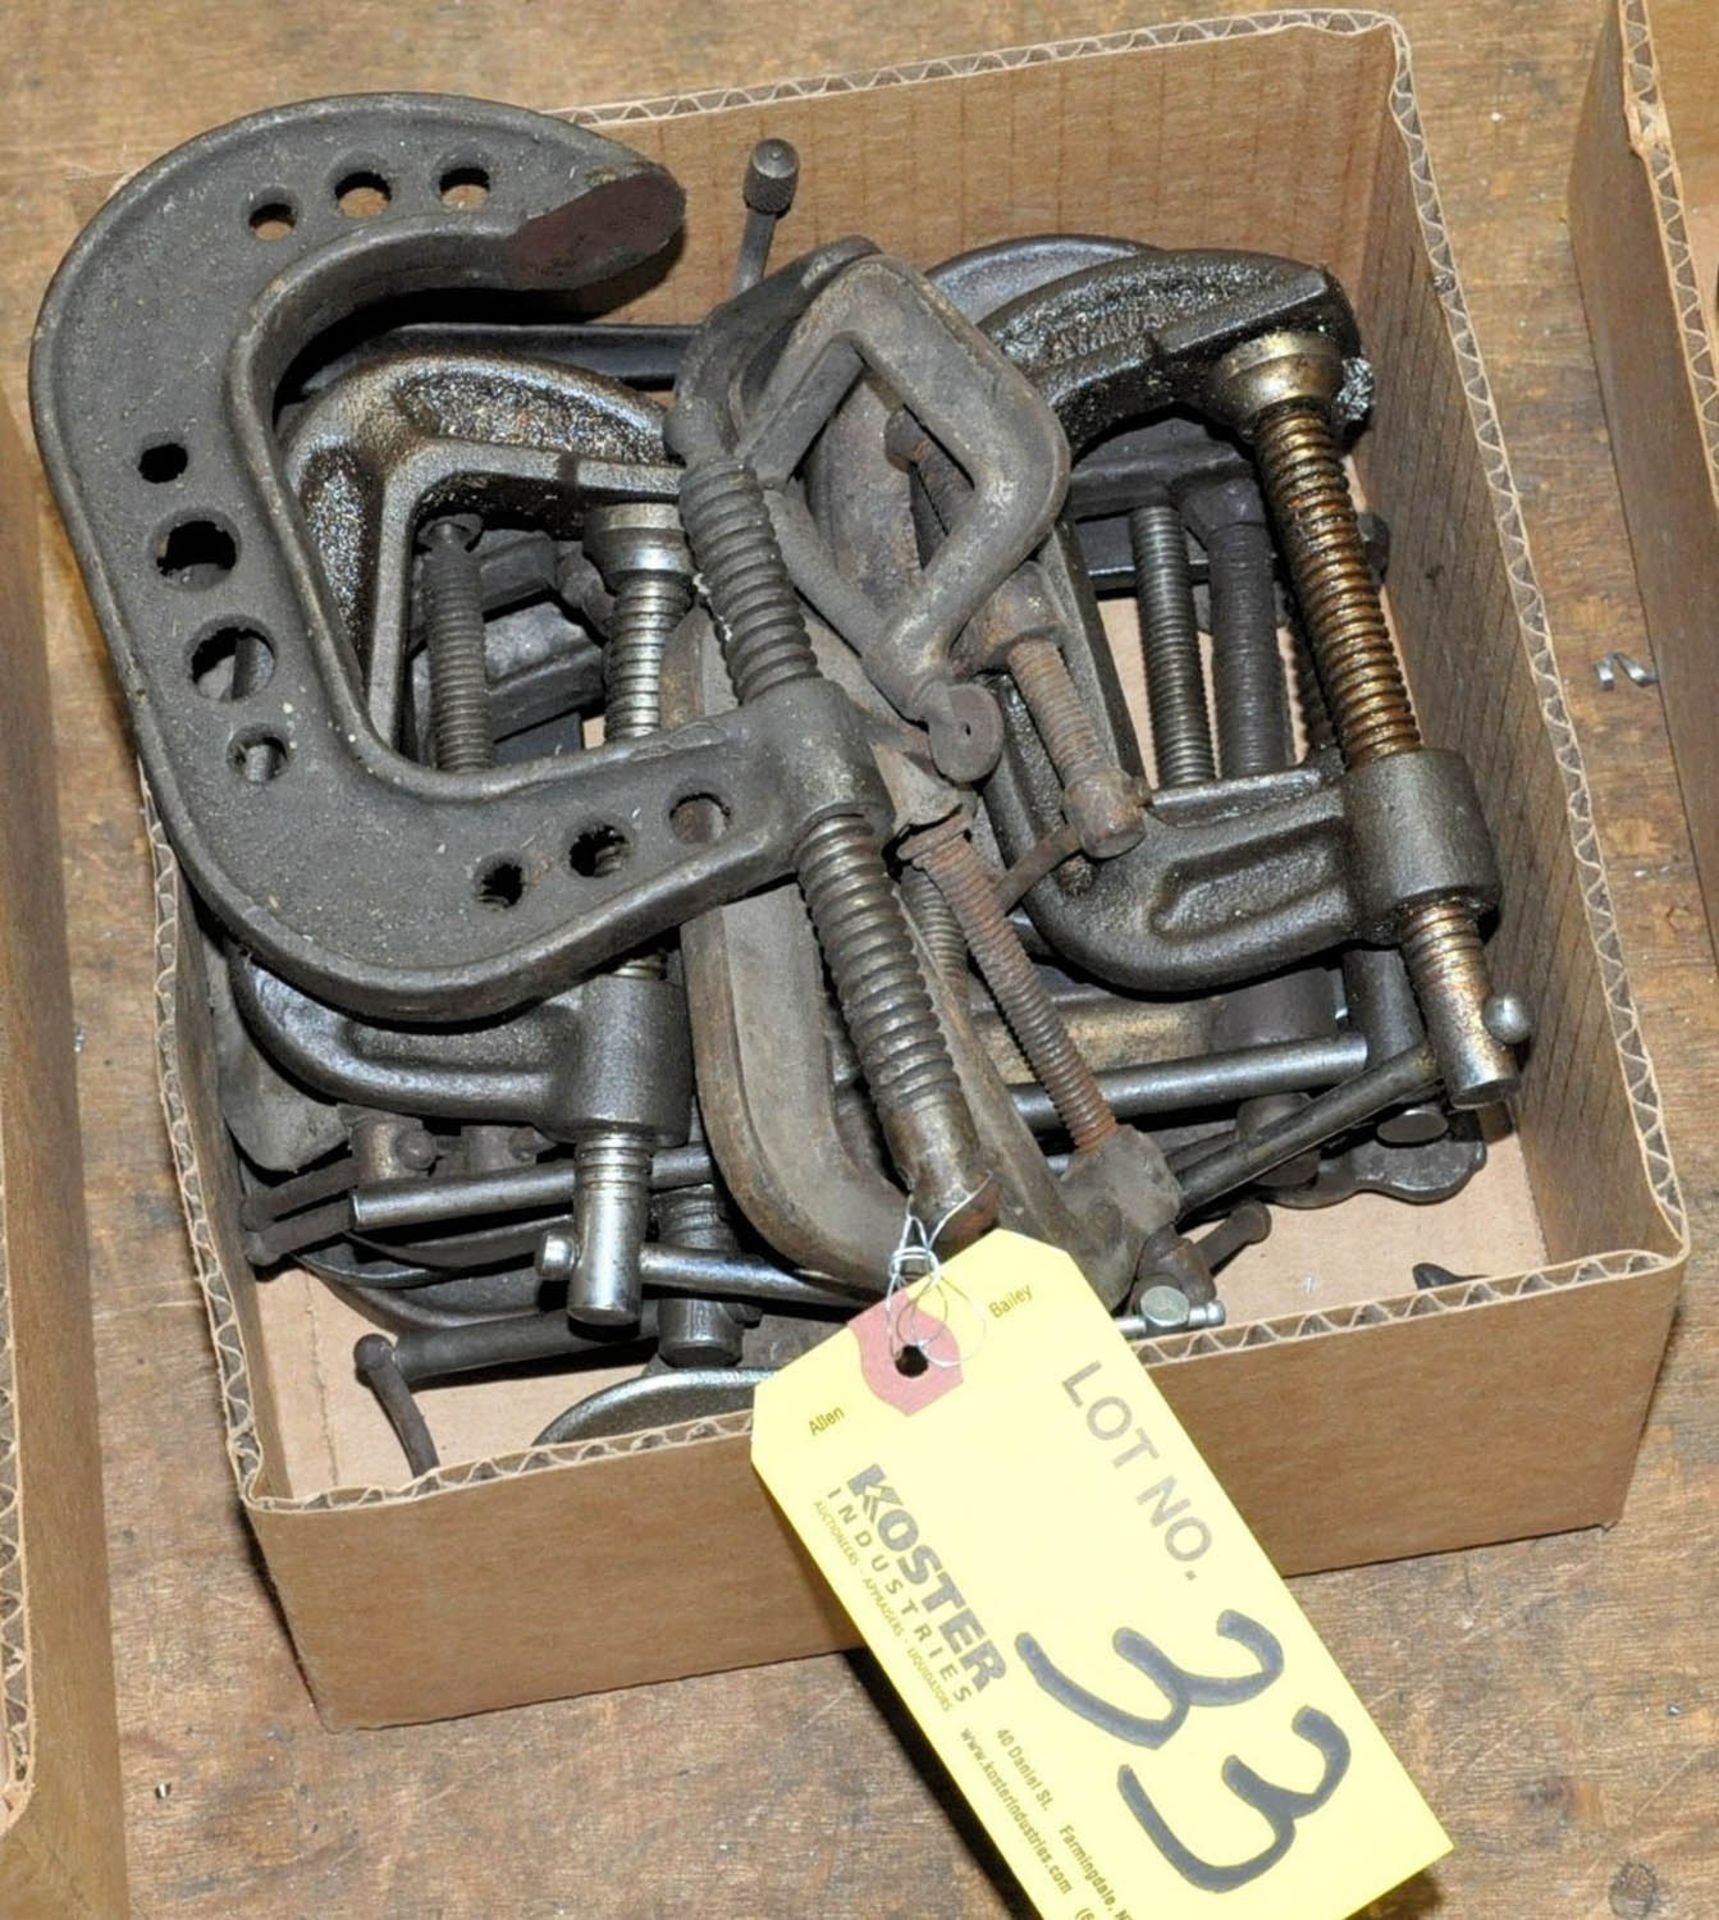 BOX OF SMALL C-CLAMPS